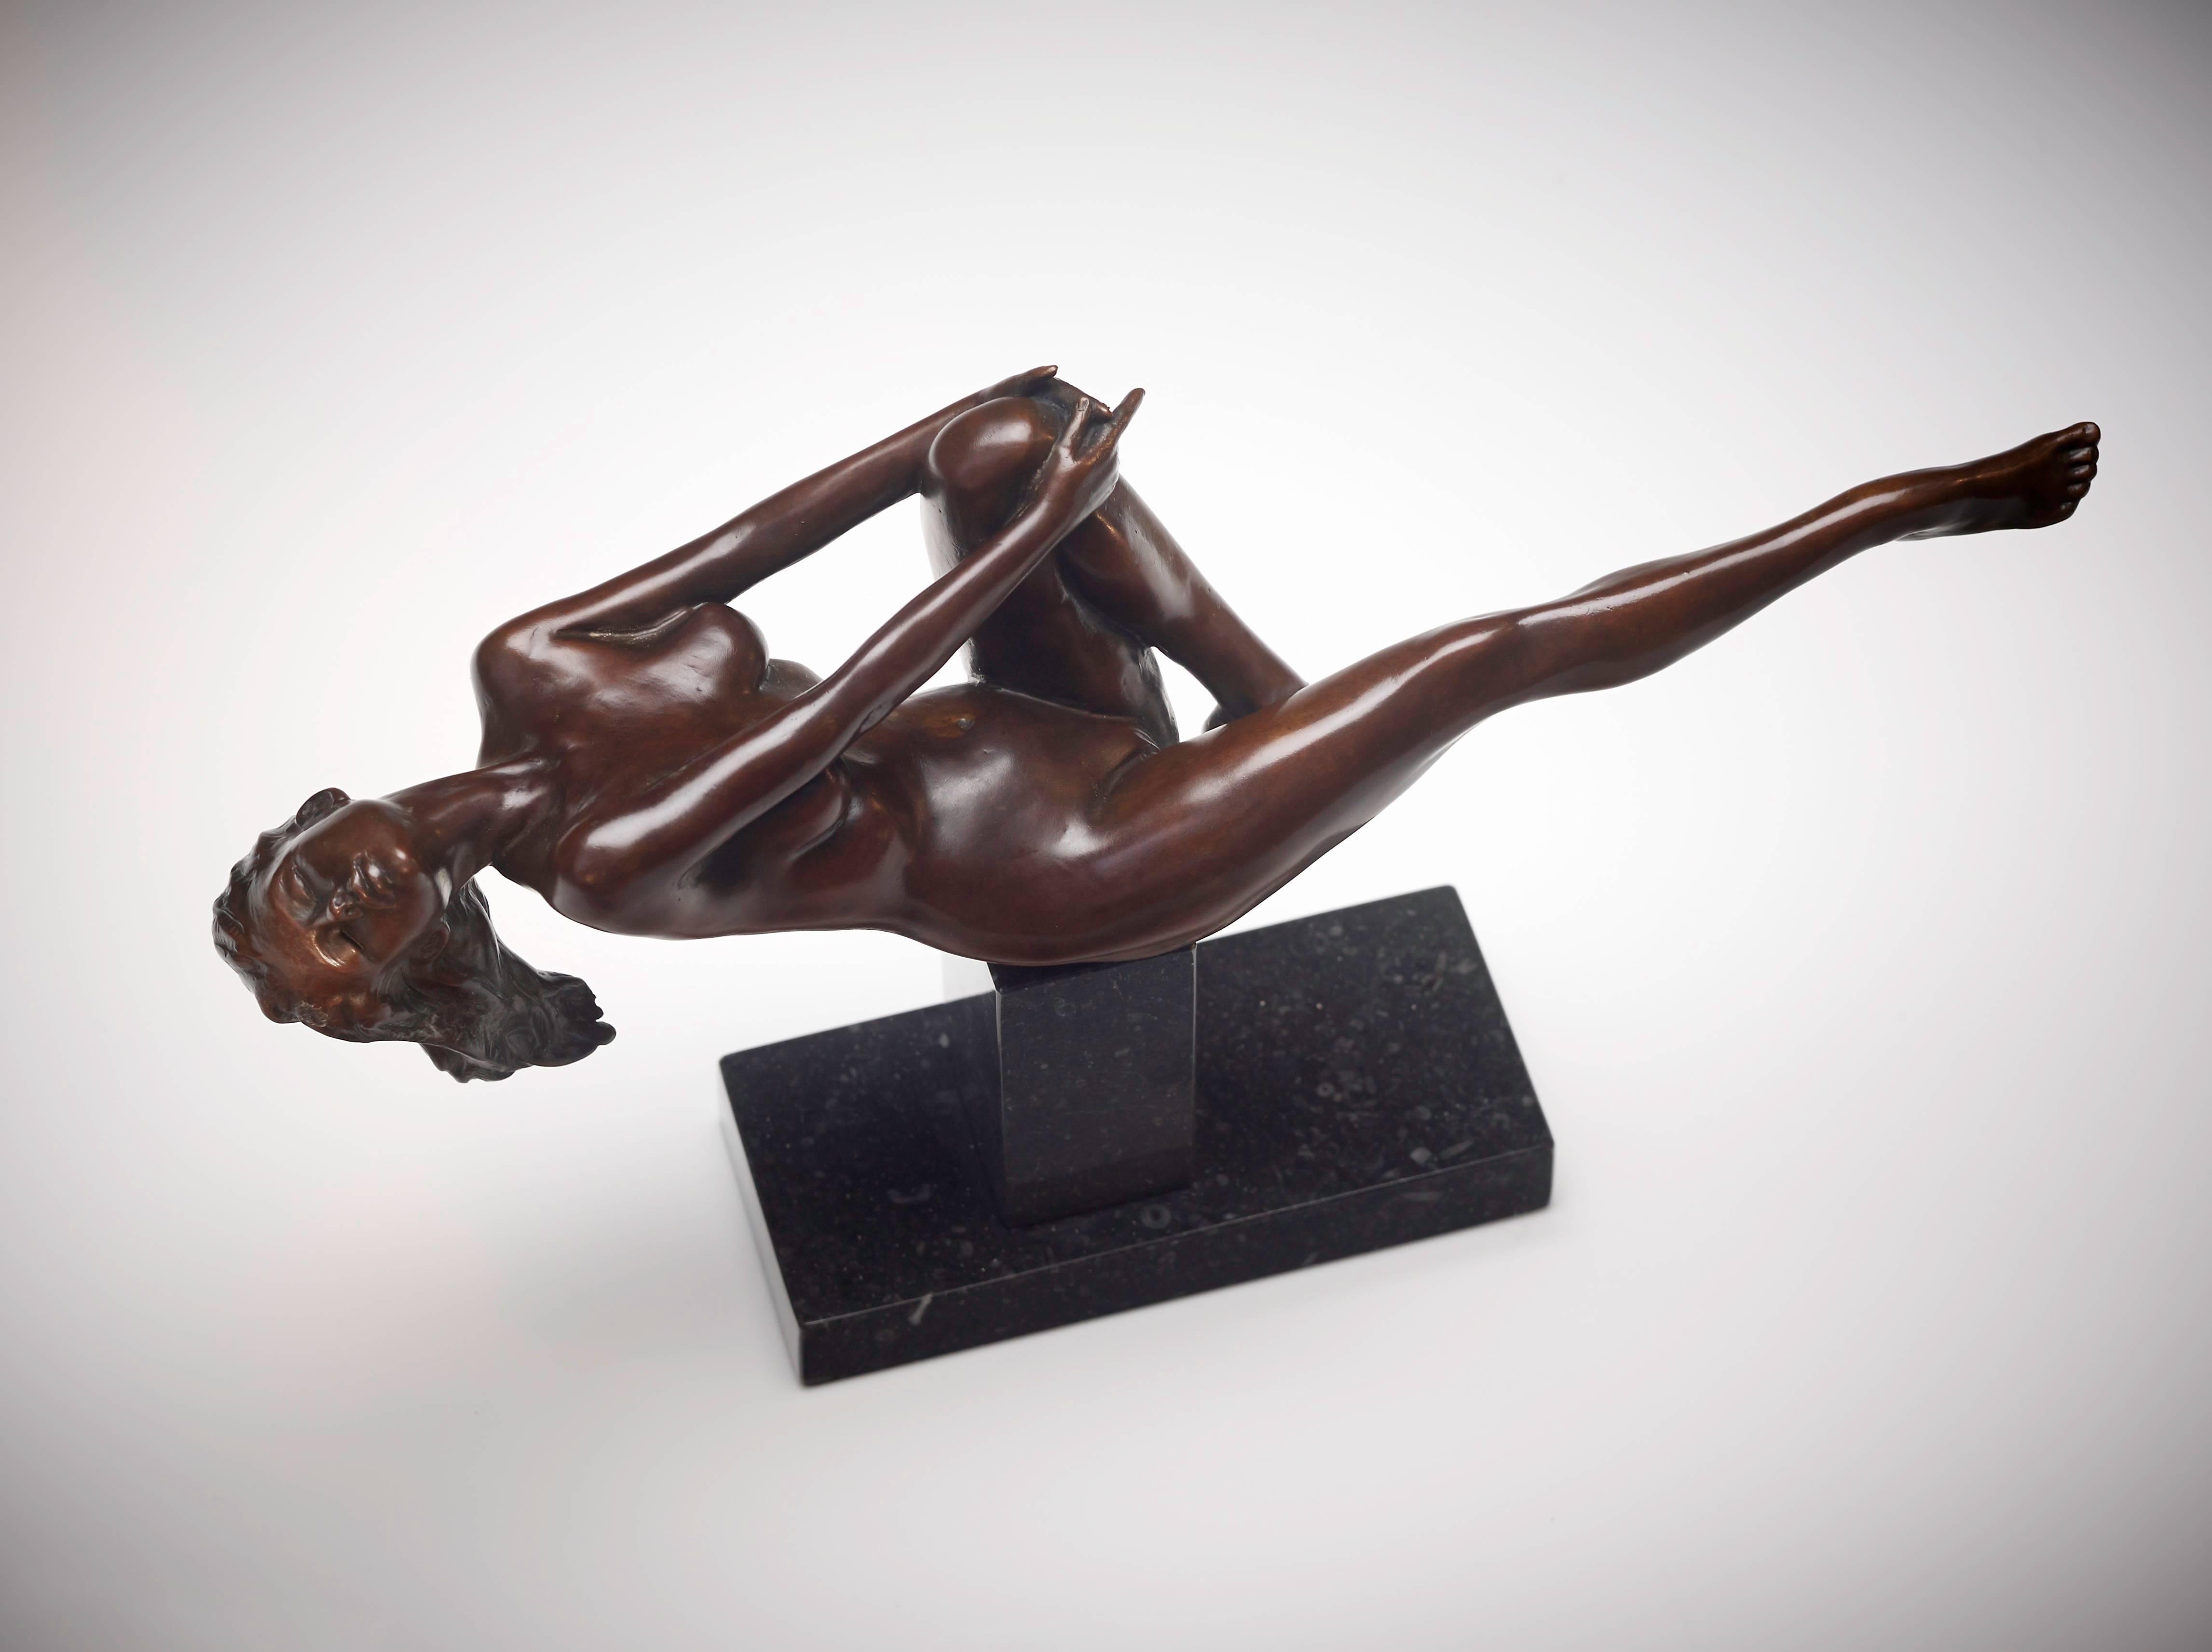 Contemporary Reclining Bronze Nude Figurative Sculpture 'Spirit' by Carl Payne For Sale 1